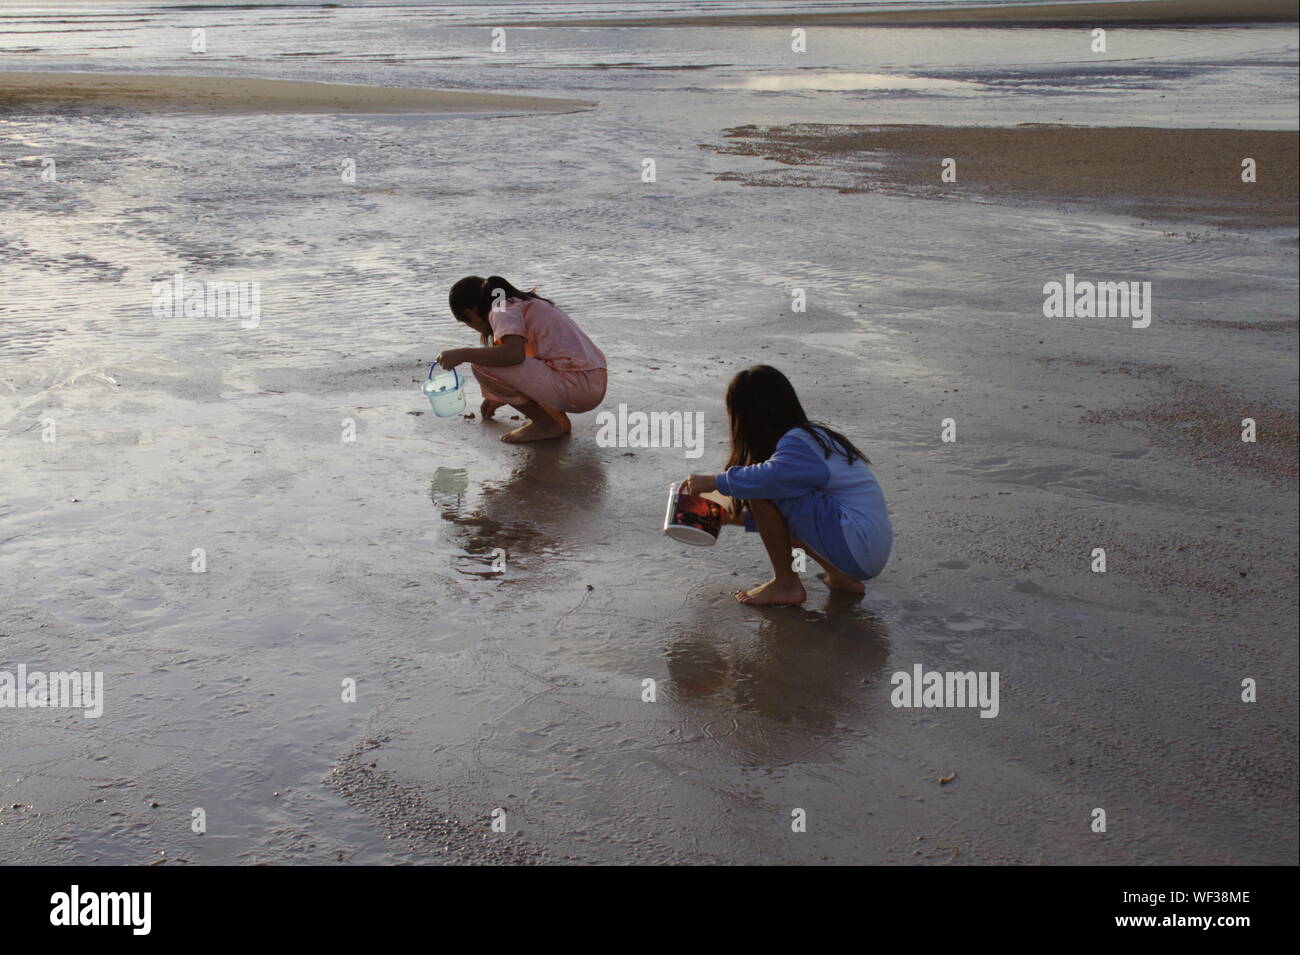 Rear View Of Girls Playing On Beach Stock Photo